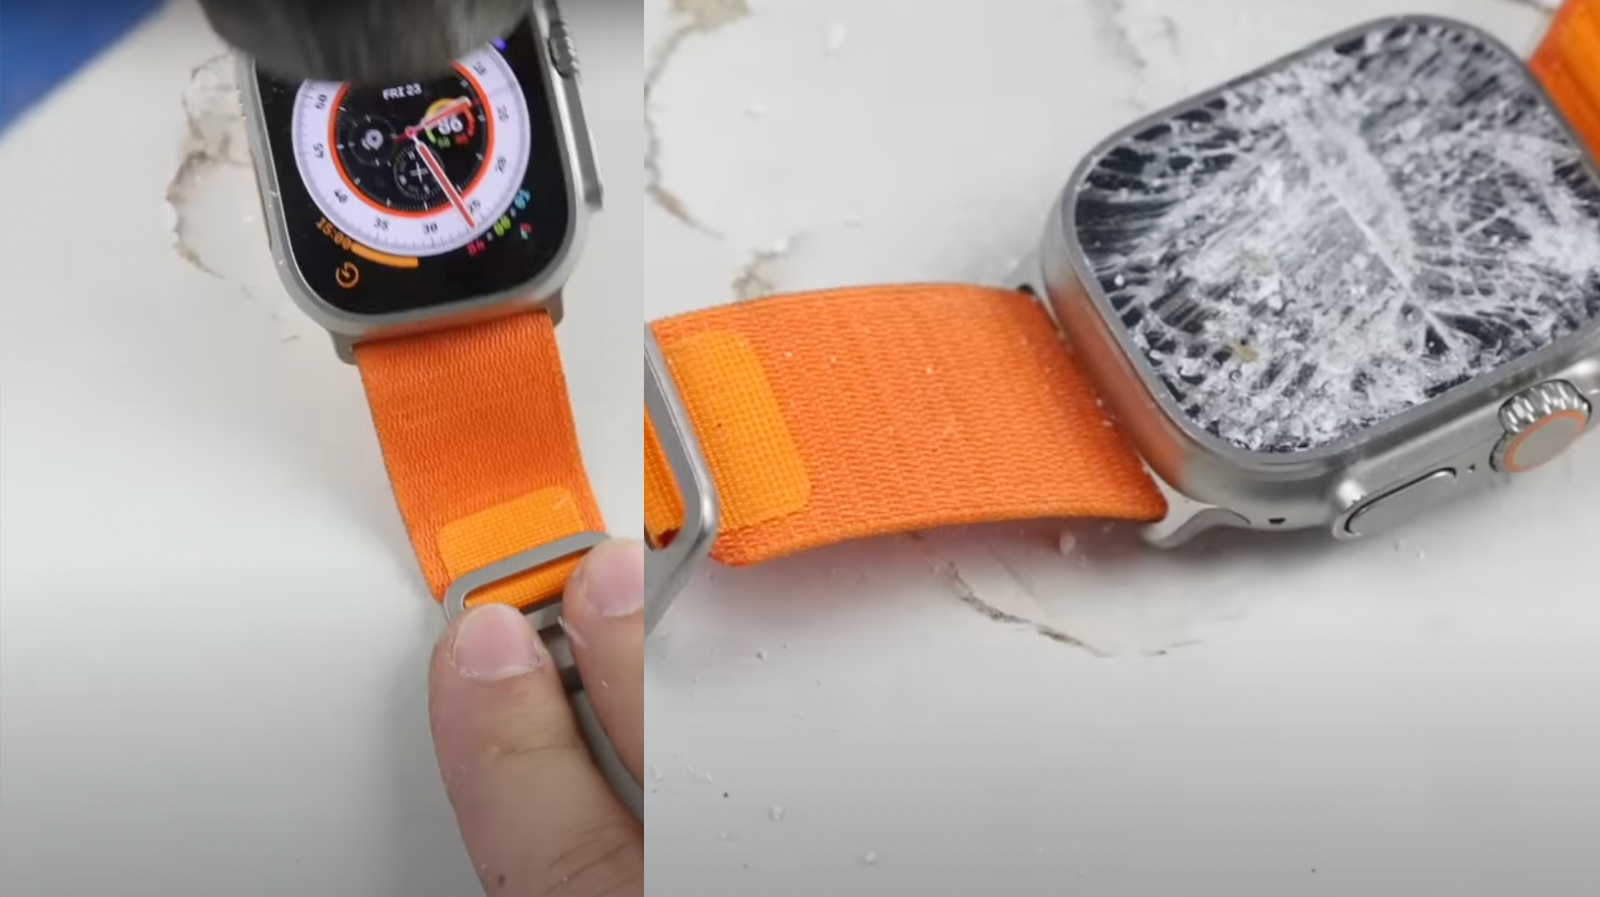 YouTuber Tests Apple Watch Ultra Durability With a Hammer: Table Breaks Before the Watch